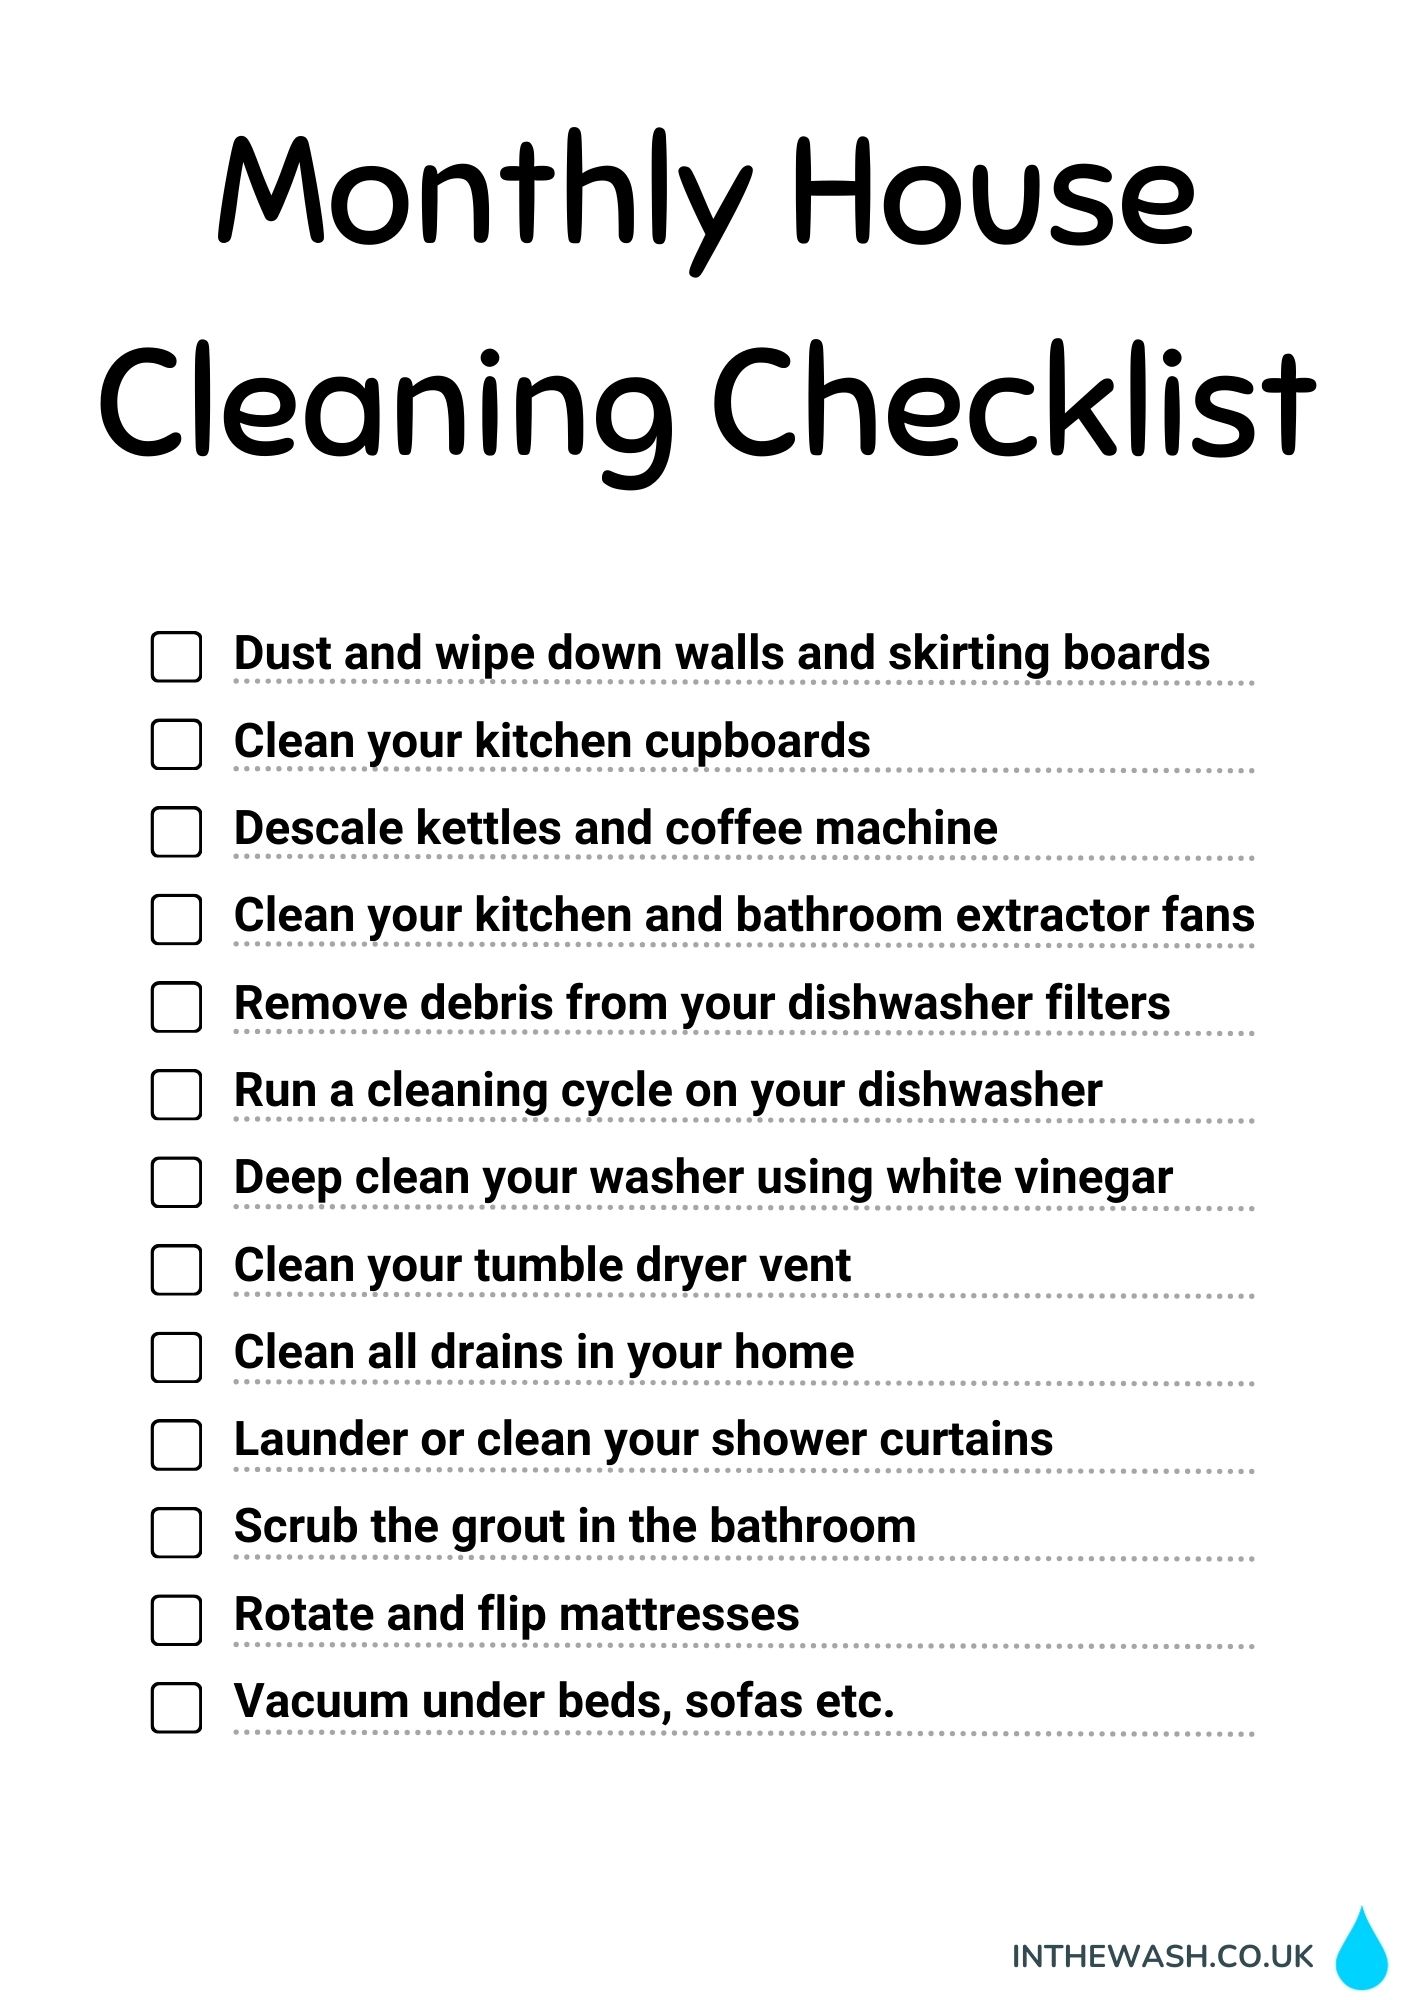 Monthly house cleaning checklist